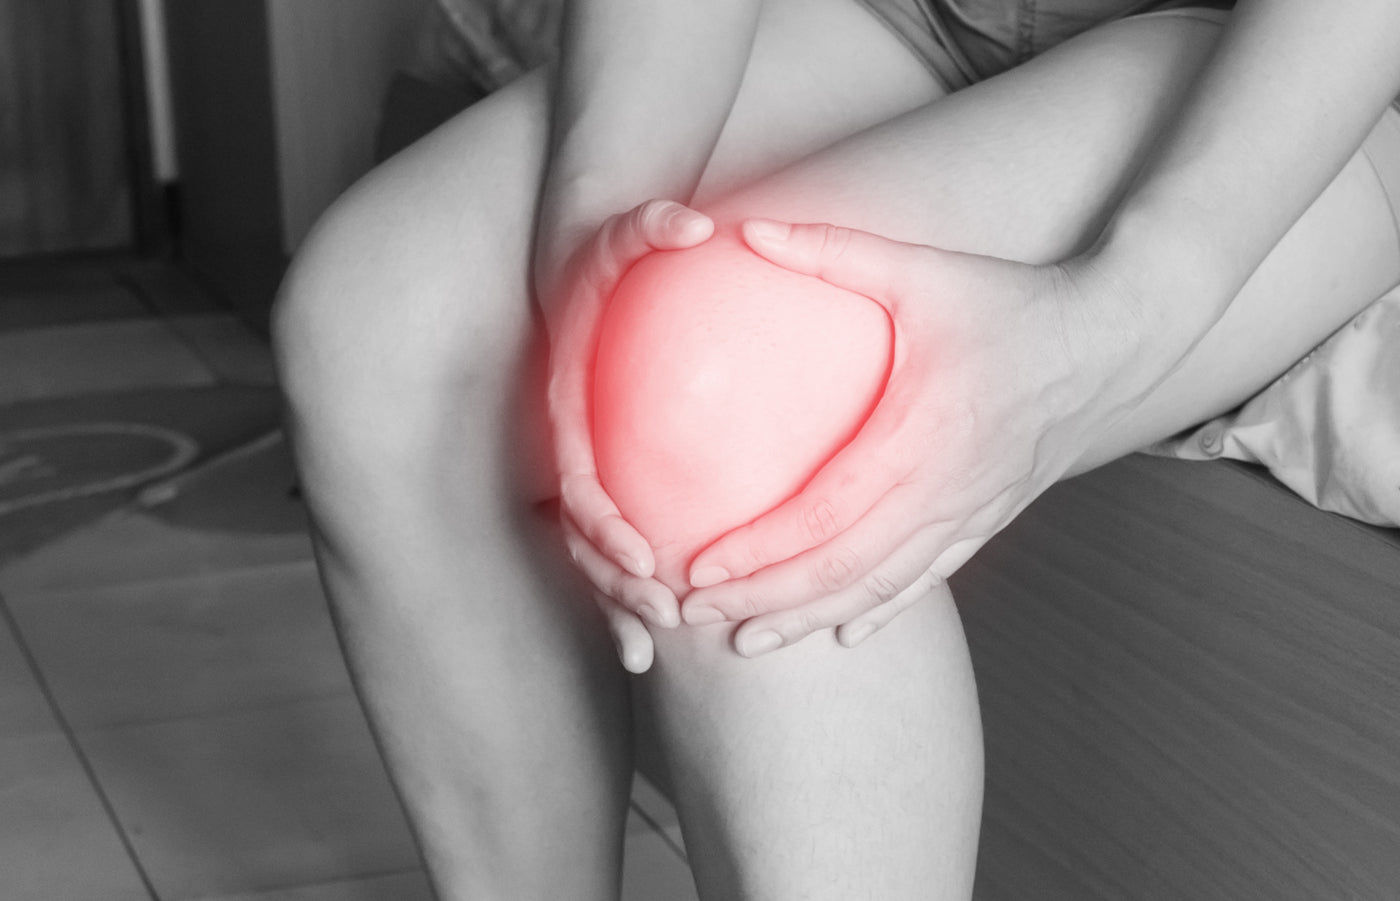 4 types of people have a high risk of knee arthritis